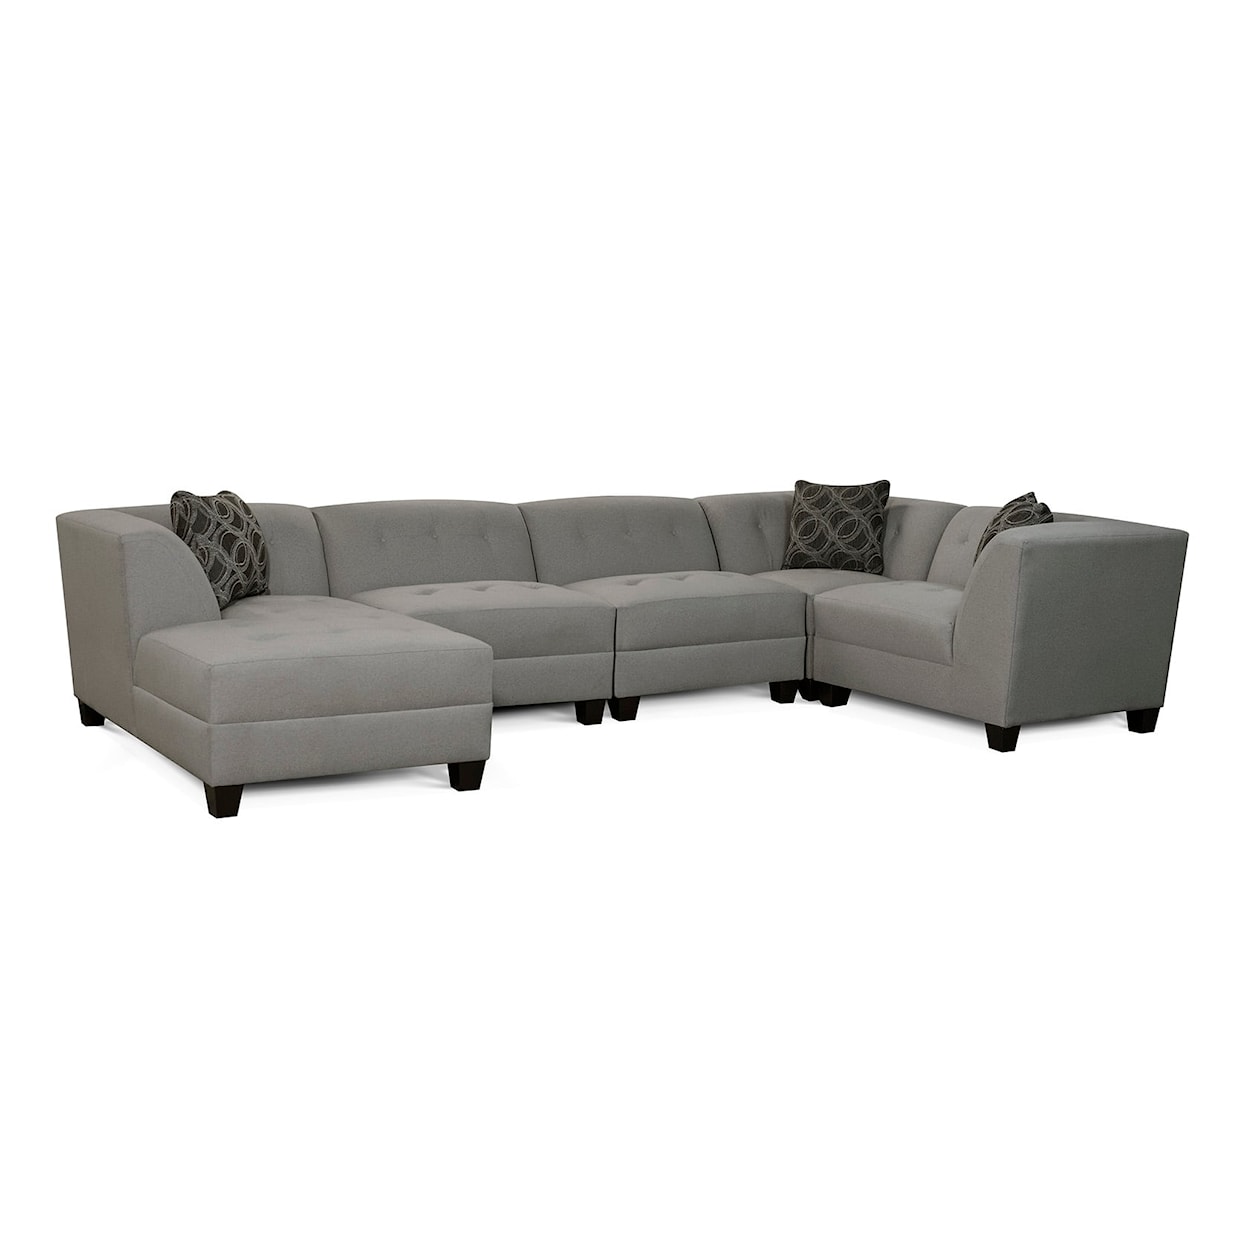 Dimensions 4M00 Series 5-Piece Sectional